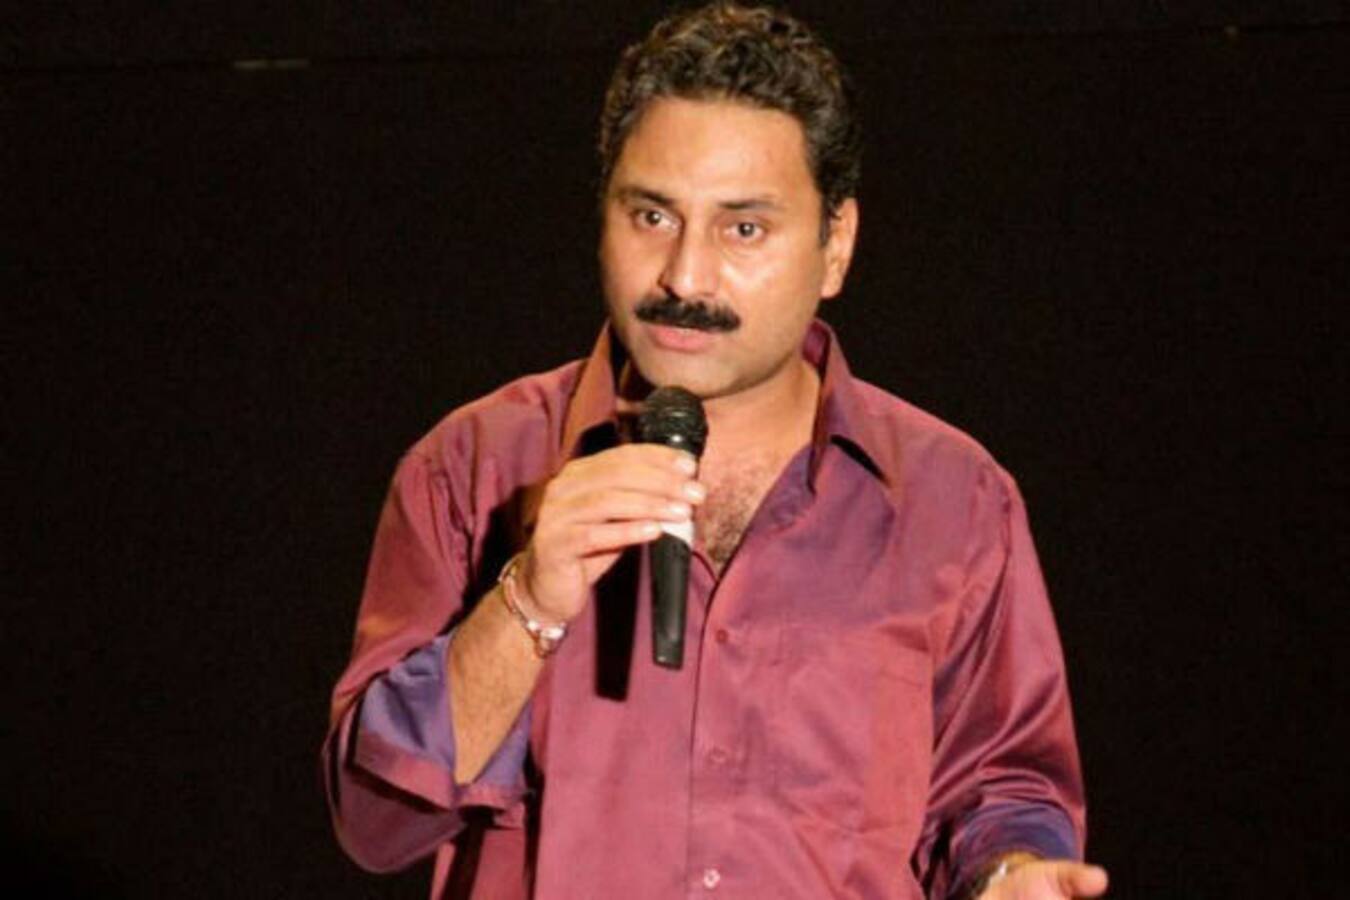 All you need to know about Peepli Live co-director Mahmood Farooqui's RAPE case!